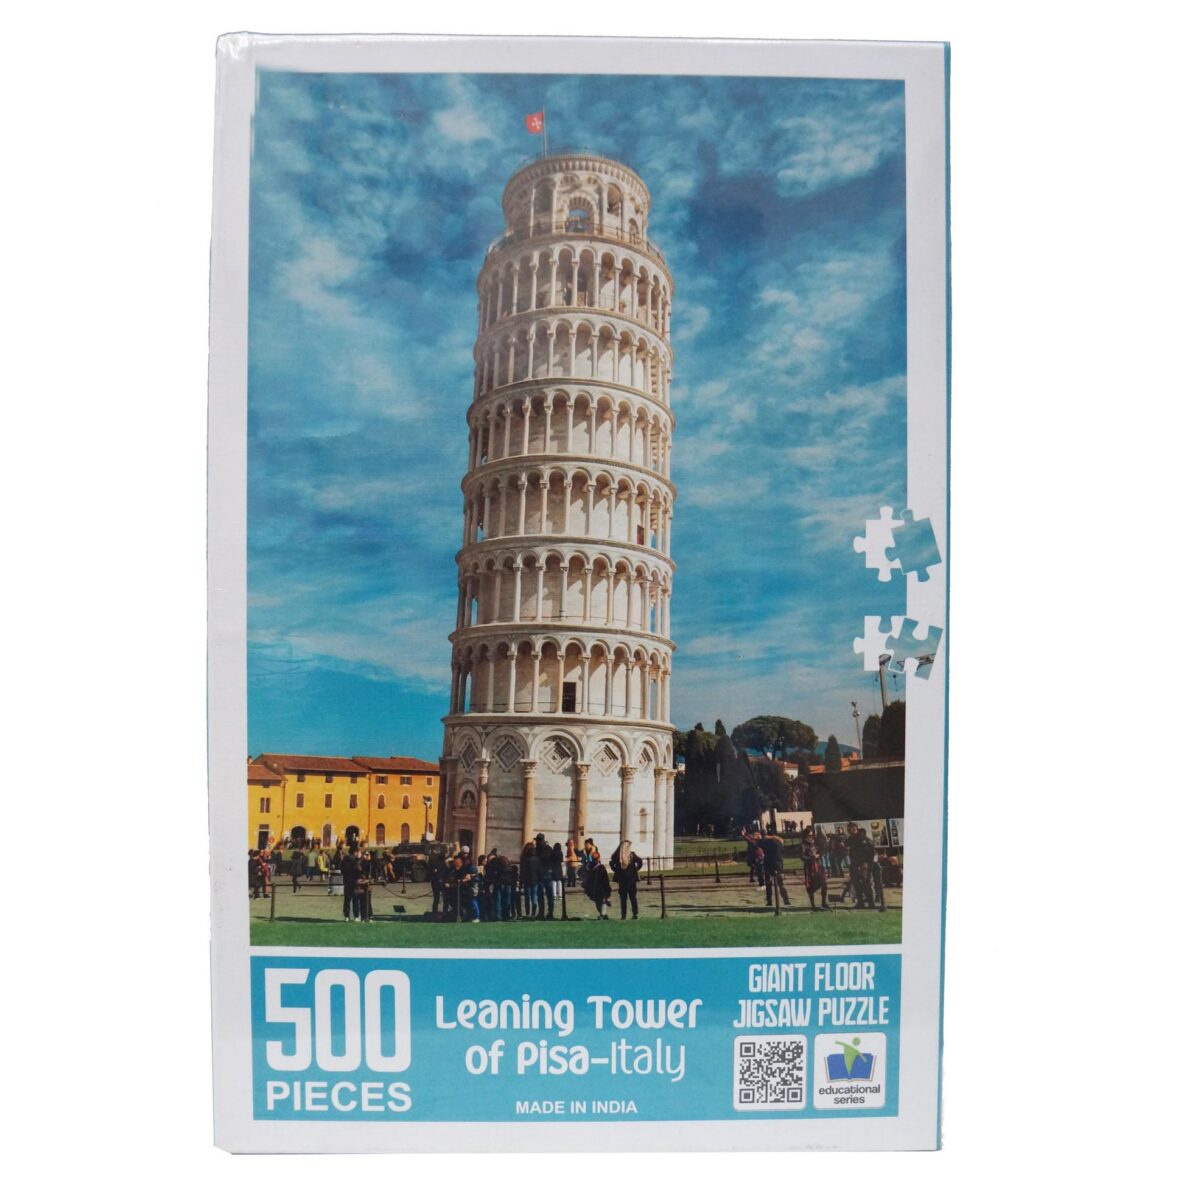 Wonders of World Leaning Tower of Pisa Jumbo Jigsaw Puzzle – 500 Pieces